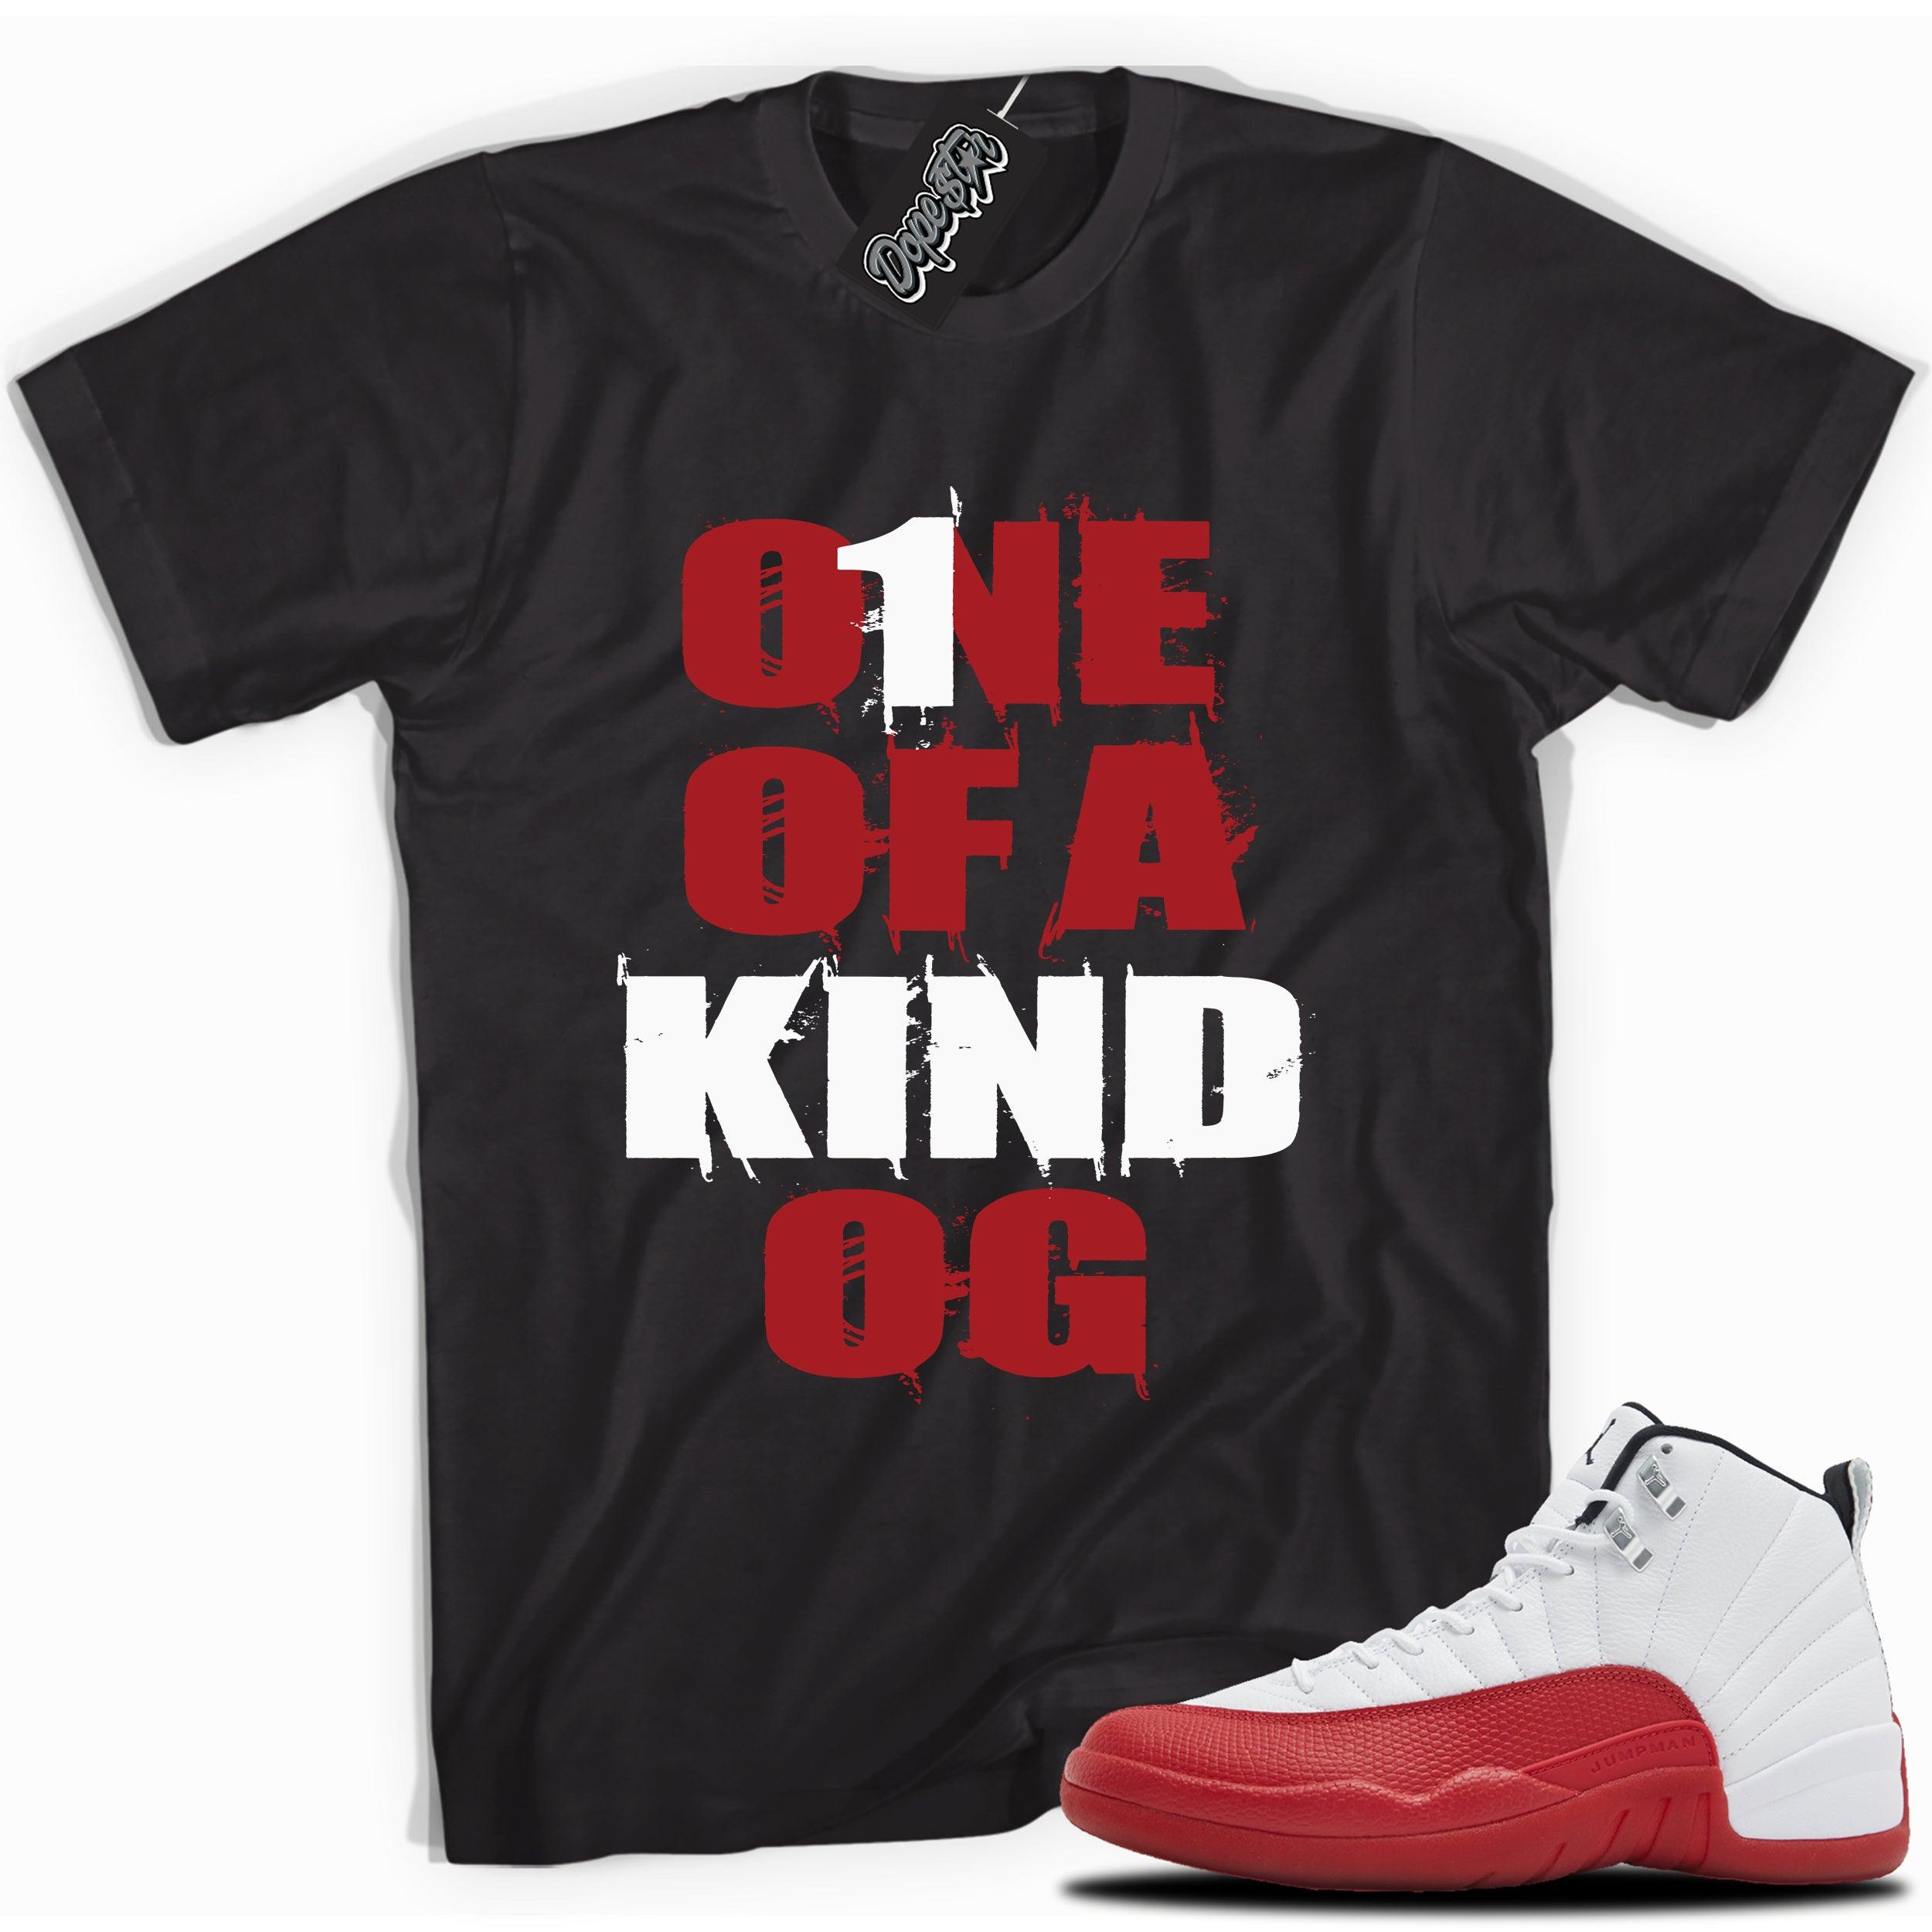 Cool Black graphic tee with “ONE OF A KIND OG” print, that perfectly matches Air Jordan 12 Retro Cherry Red 2023 red and white sneakers 